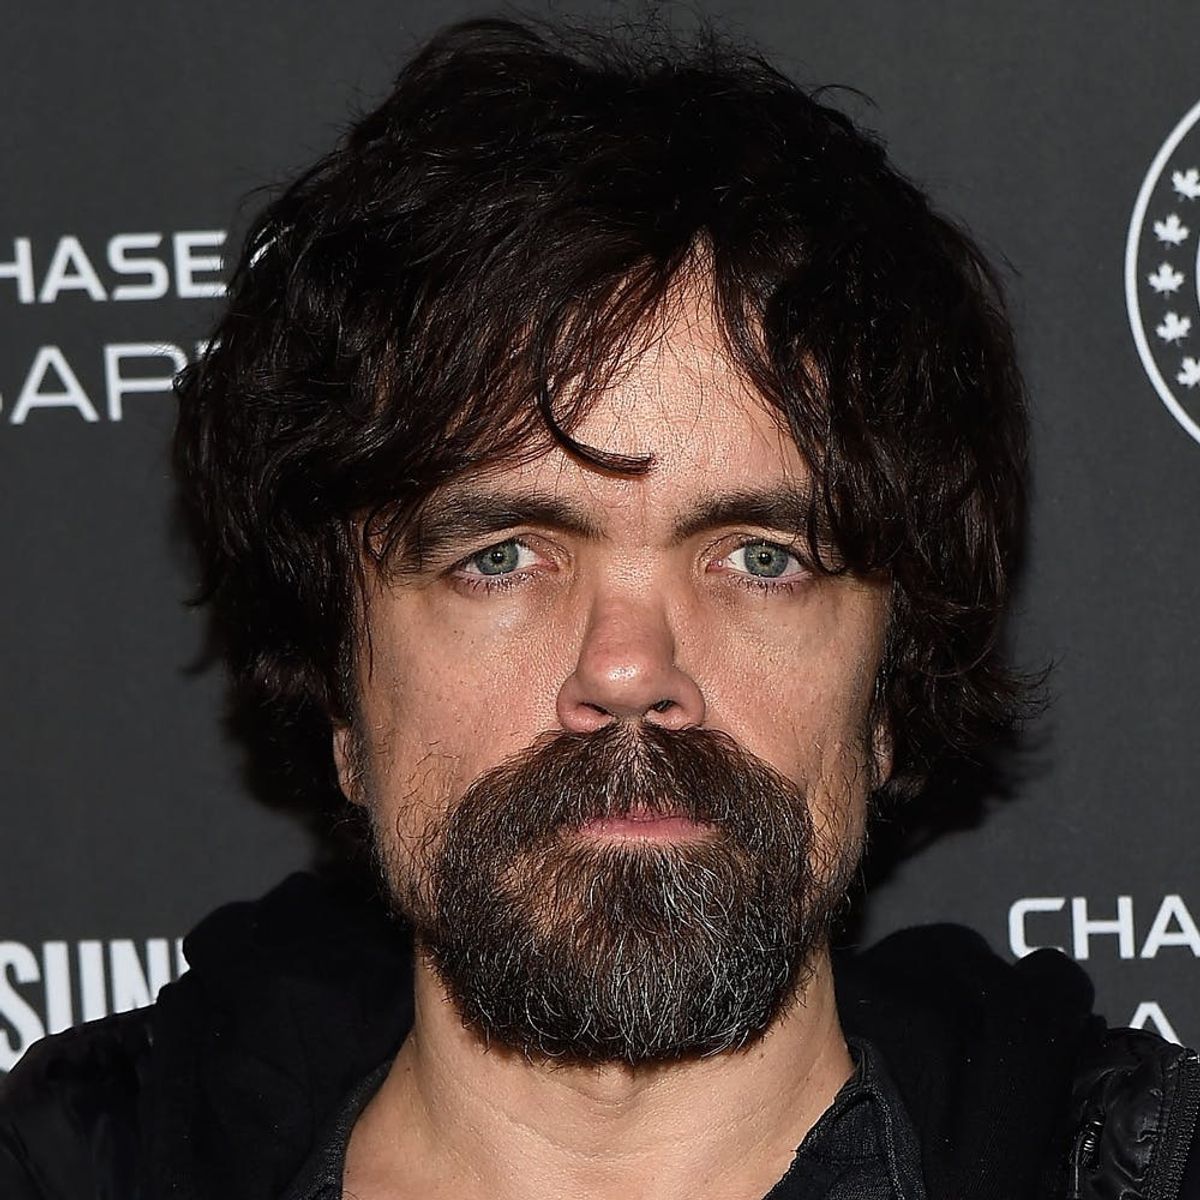 “Game of Thrones” Star Peter Dinklage Reportedly Welcomed His Second Child With Wife Erica Schmidt